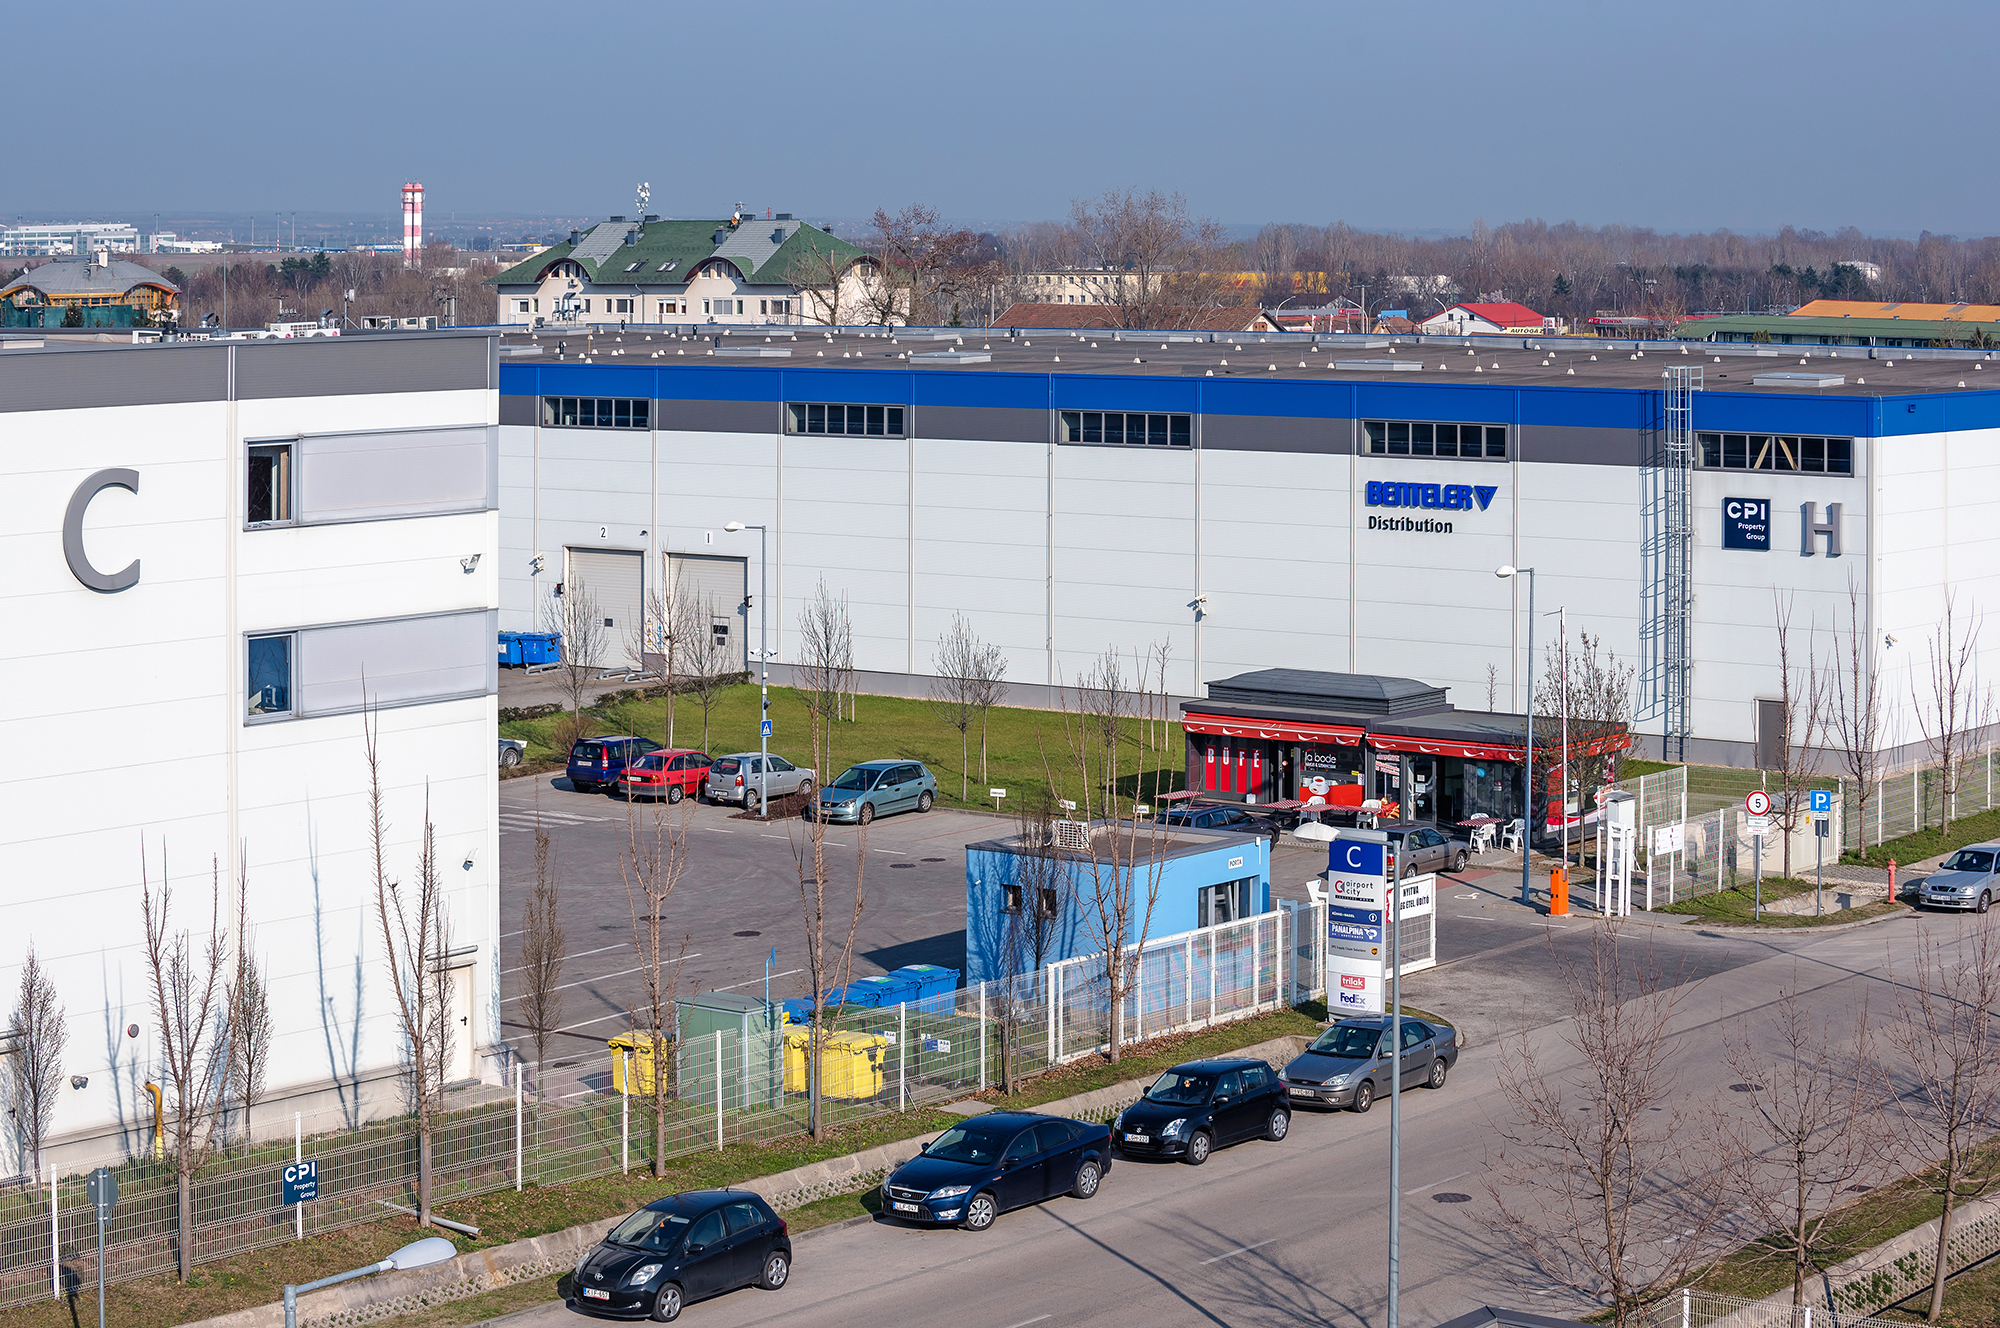 Wing buys Airport City Logistics Park